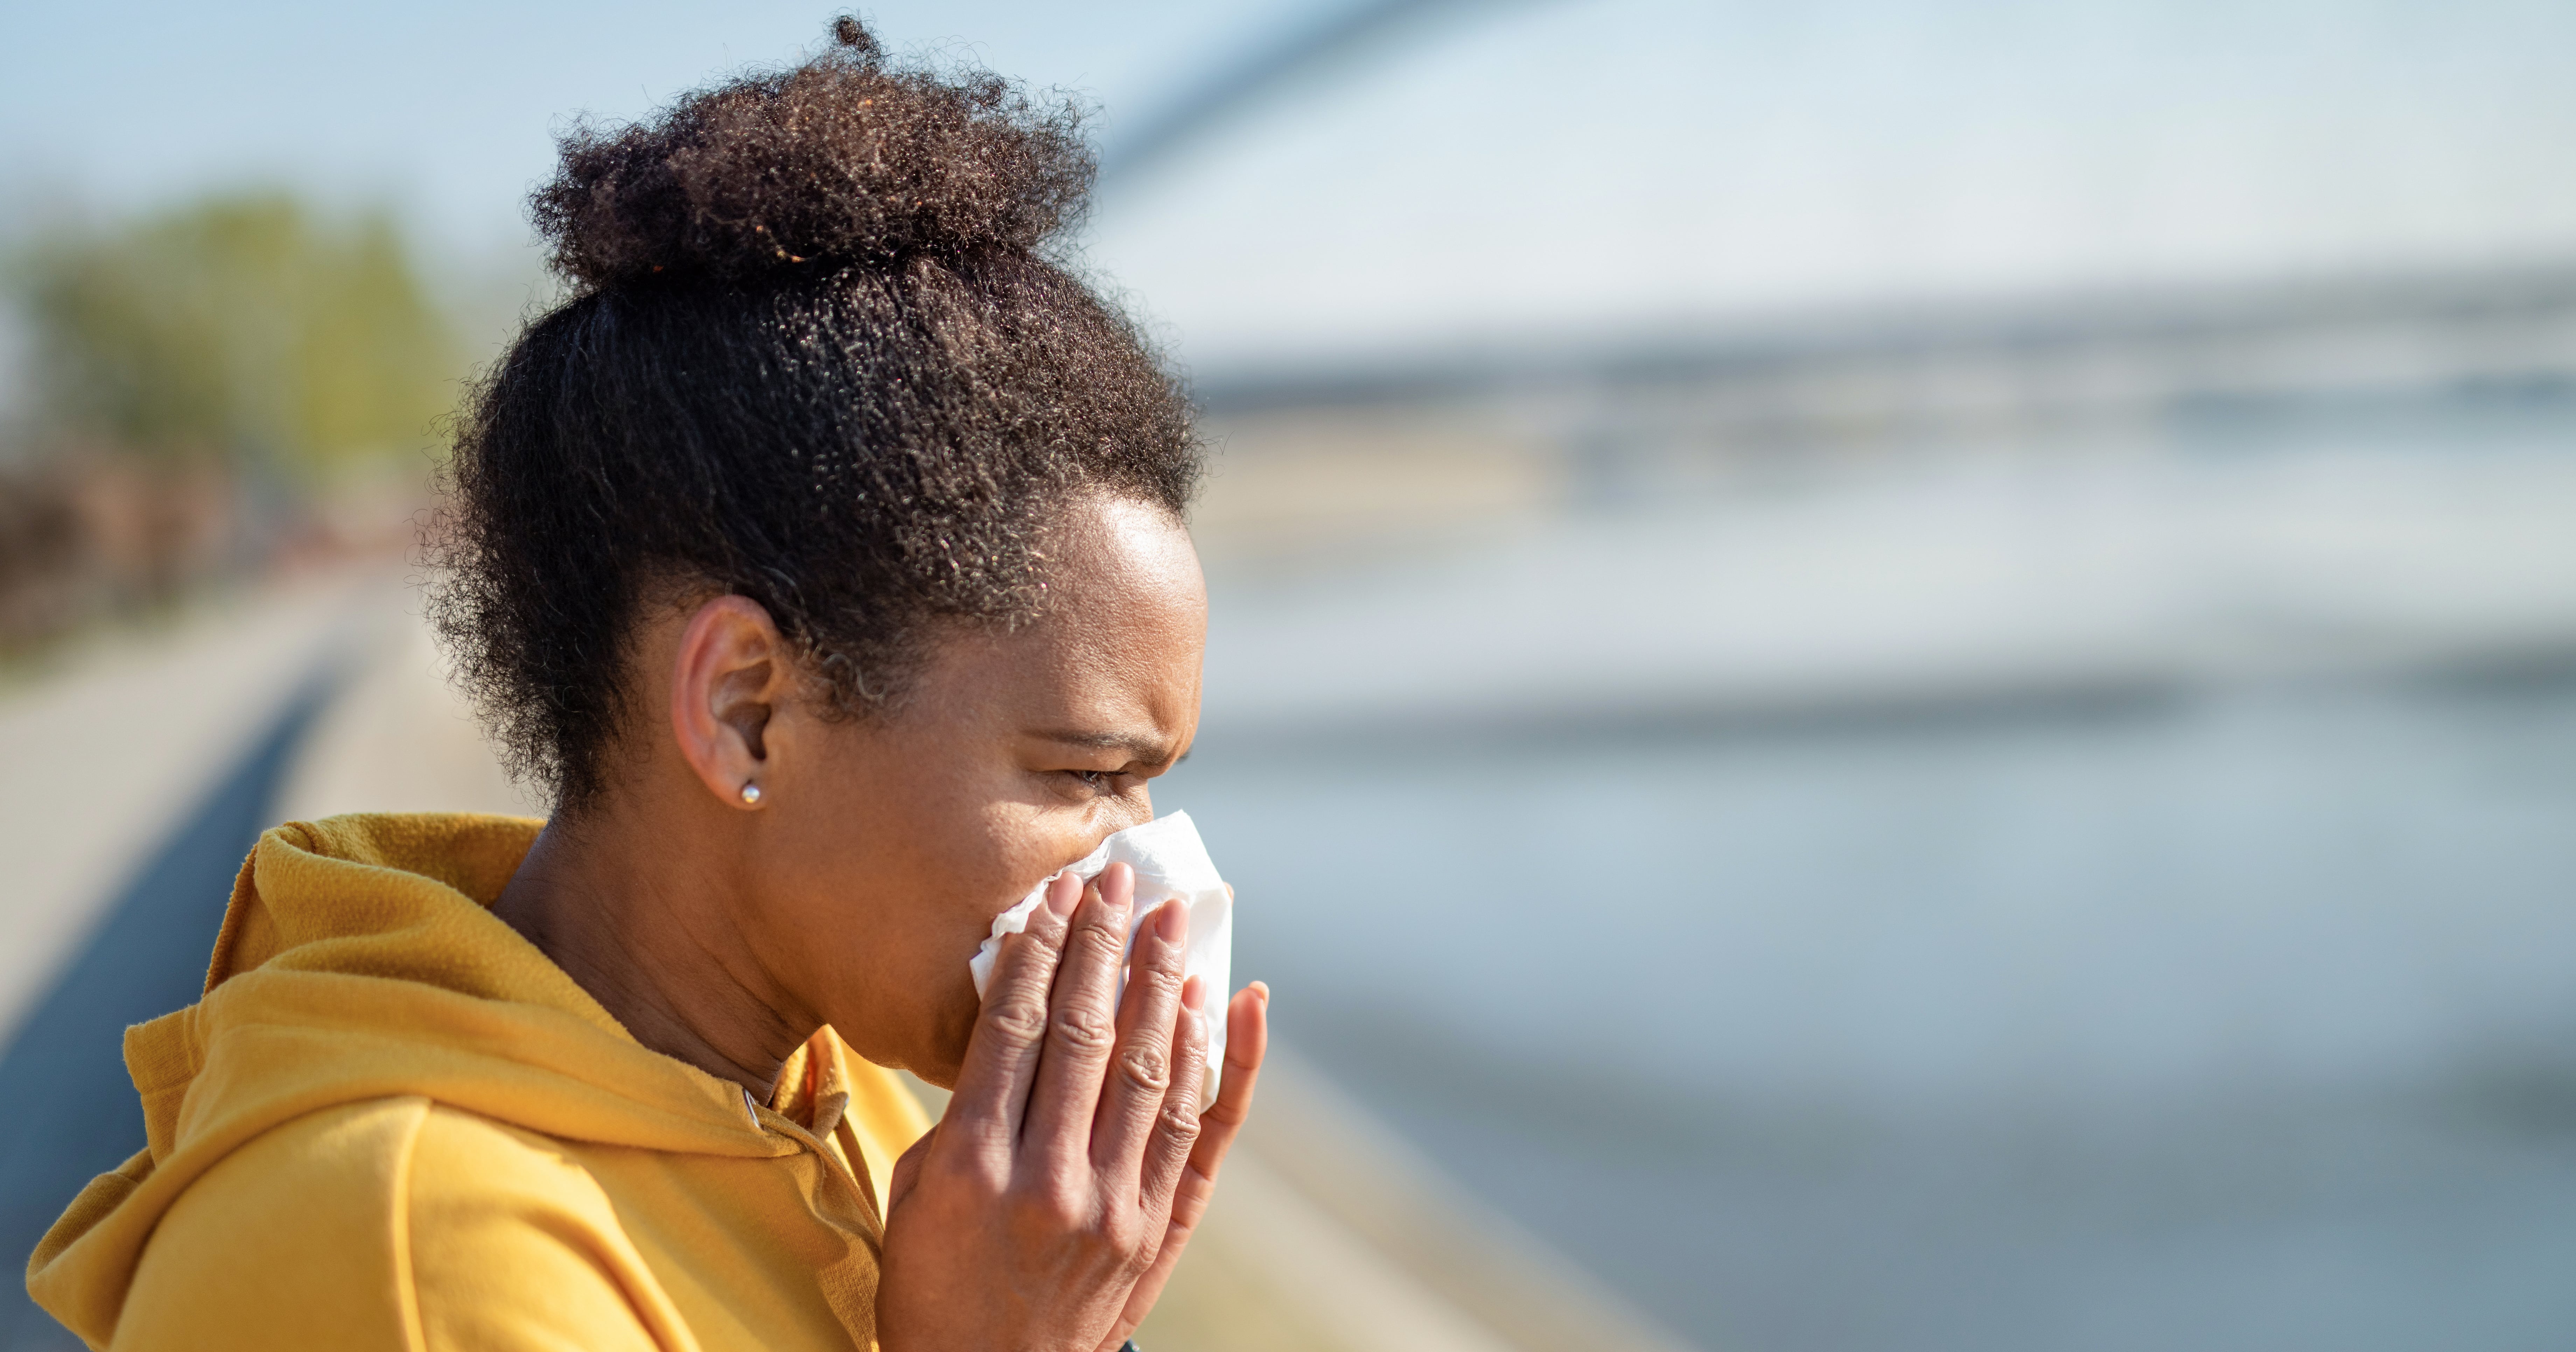 How to Tell If You Have Allergies or COVID, According to 2 MDs